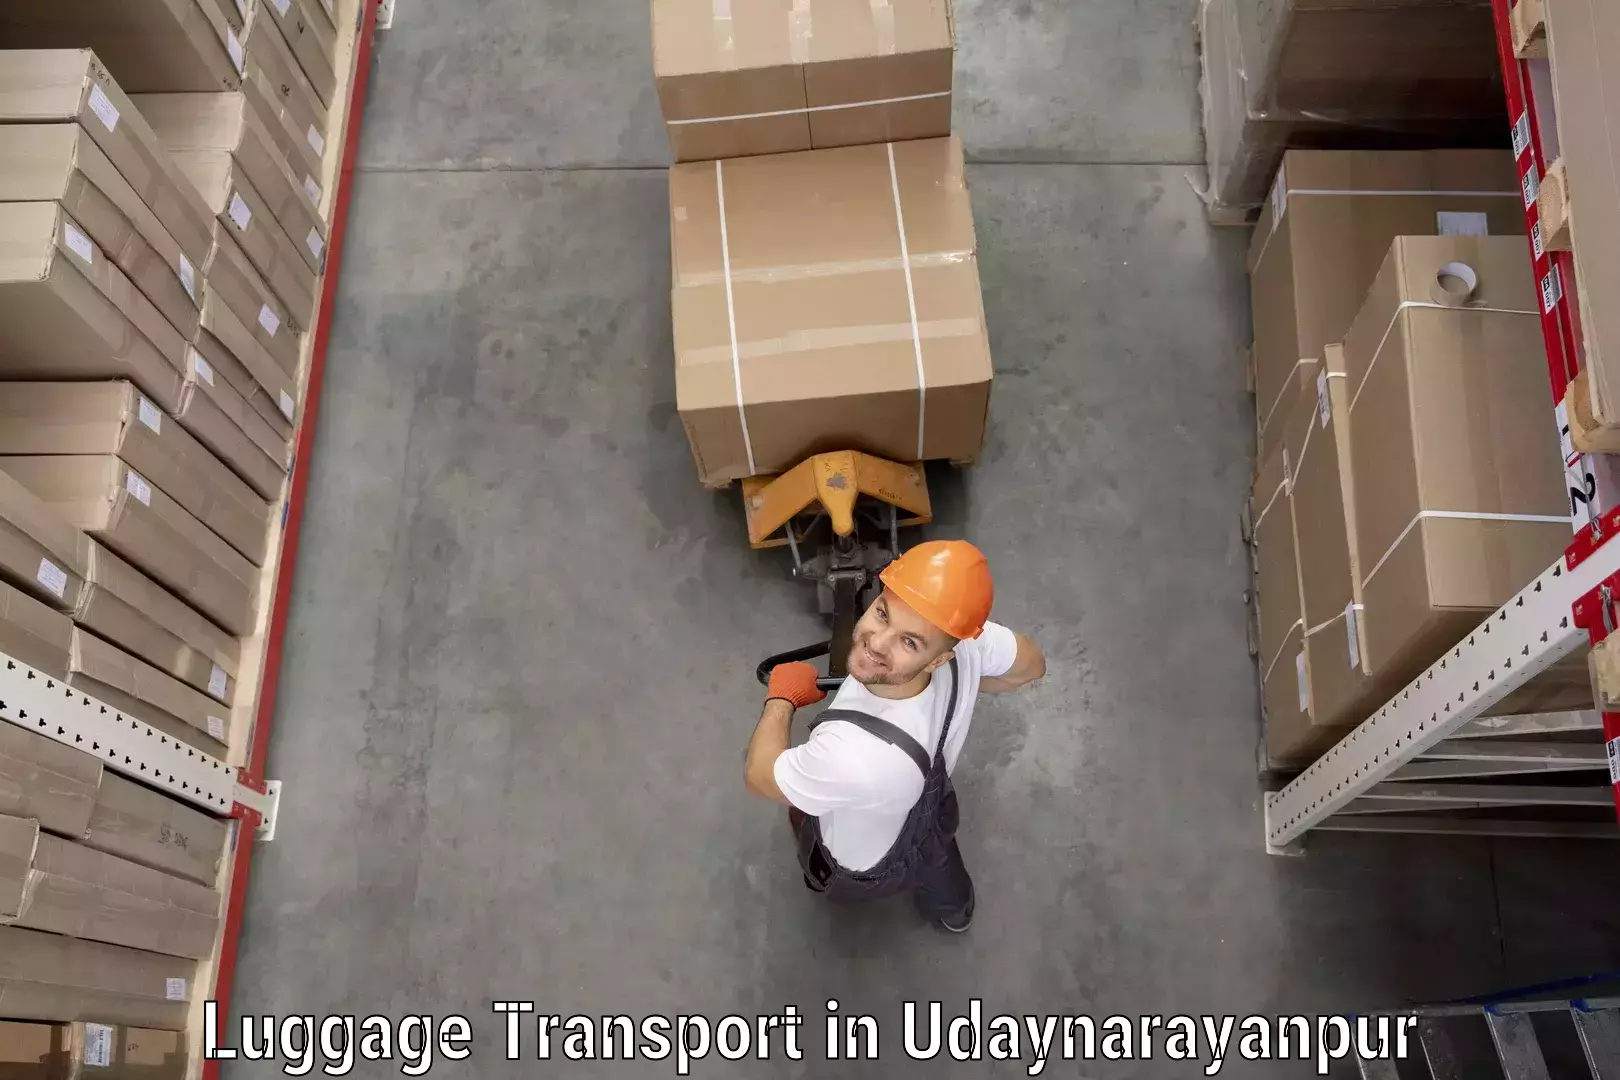 Luggage transport operations in Udaynarayanpur